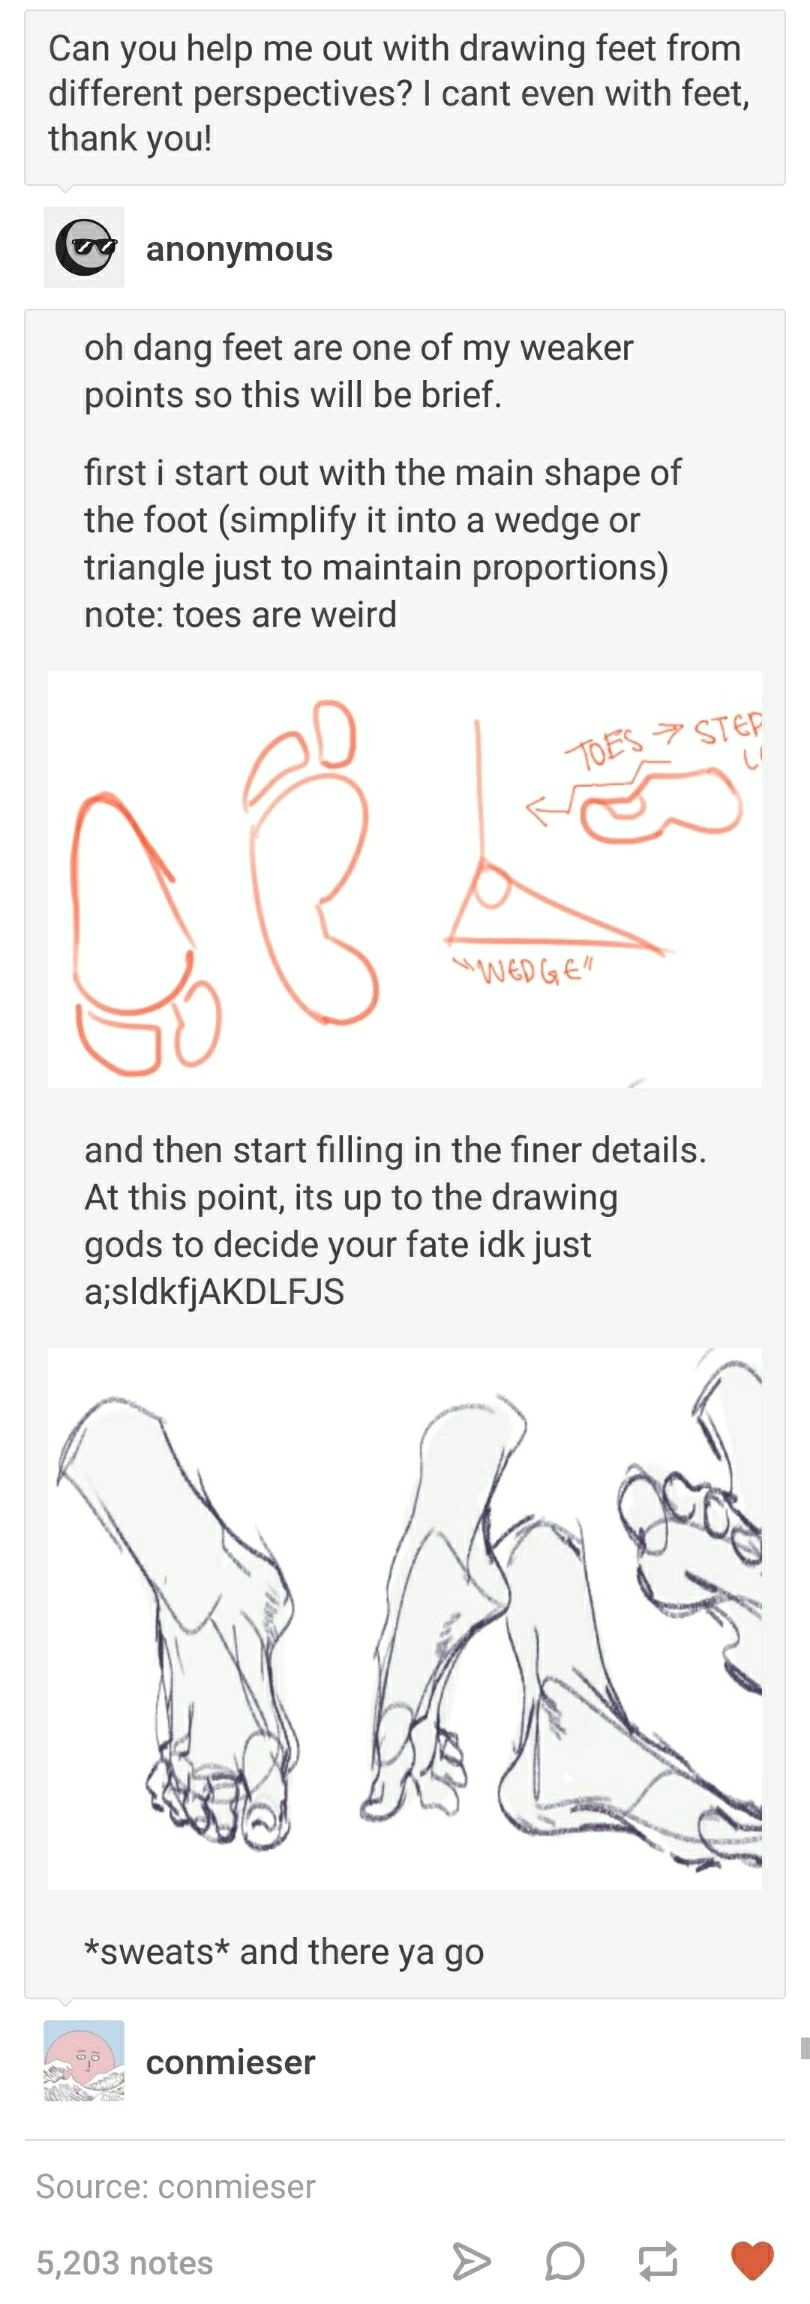 Drawing Things with Numbers Feet Reference Models and Flesh Pinterest Drawings Art